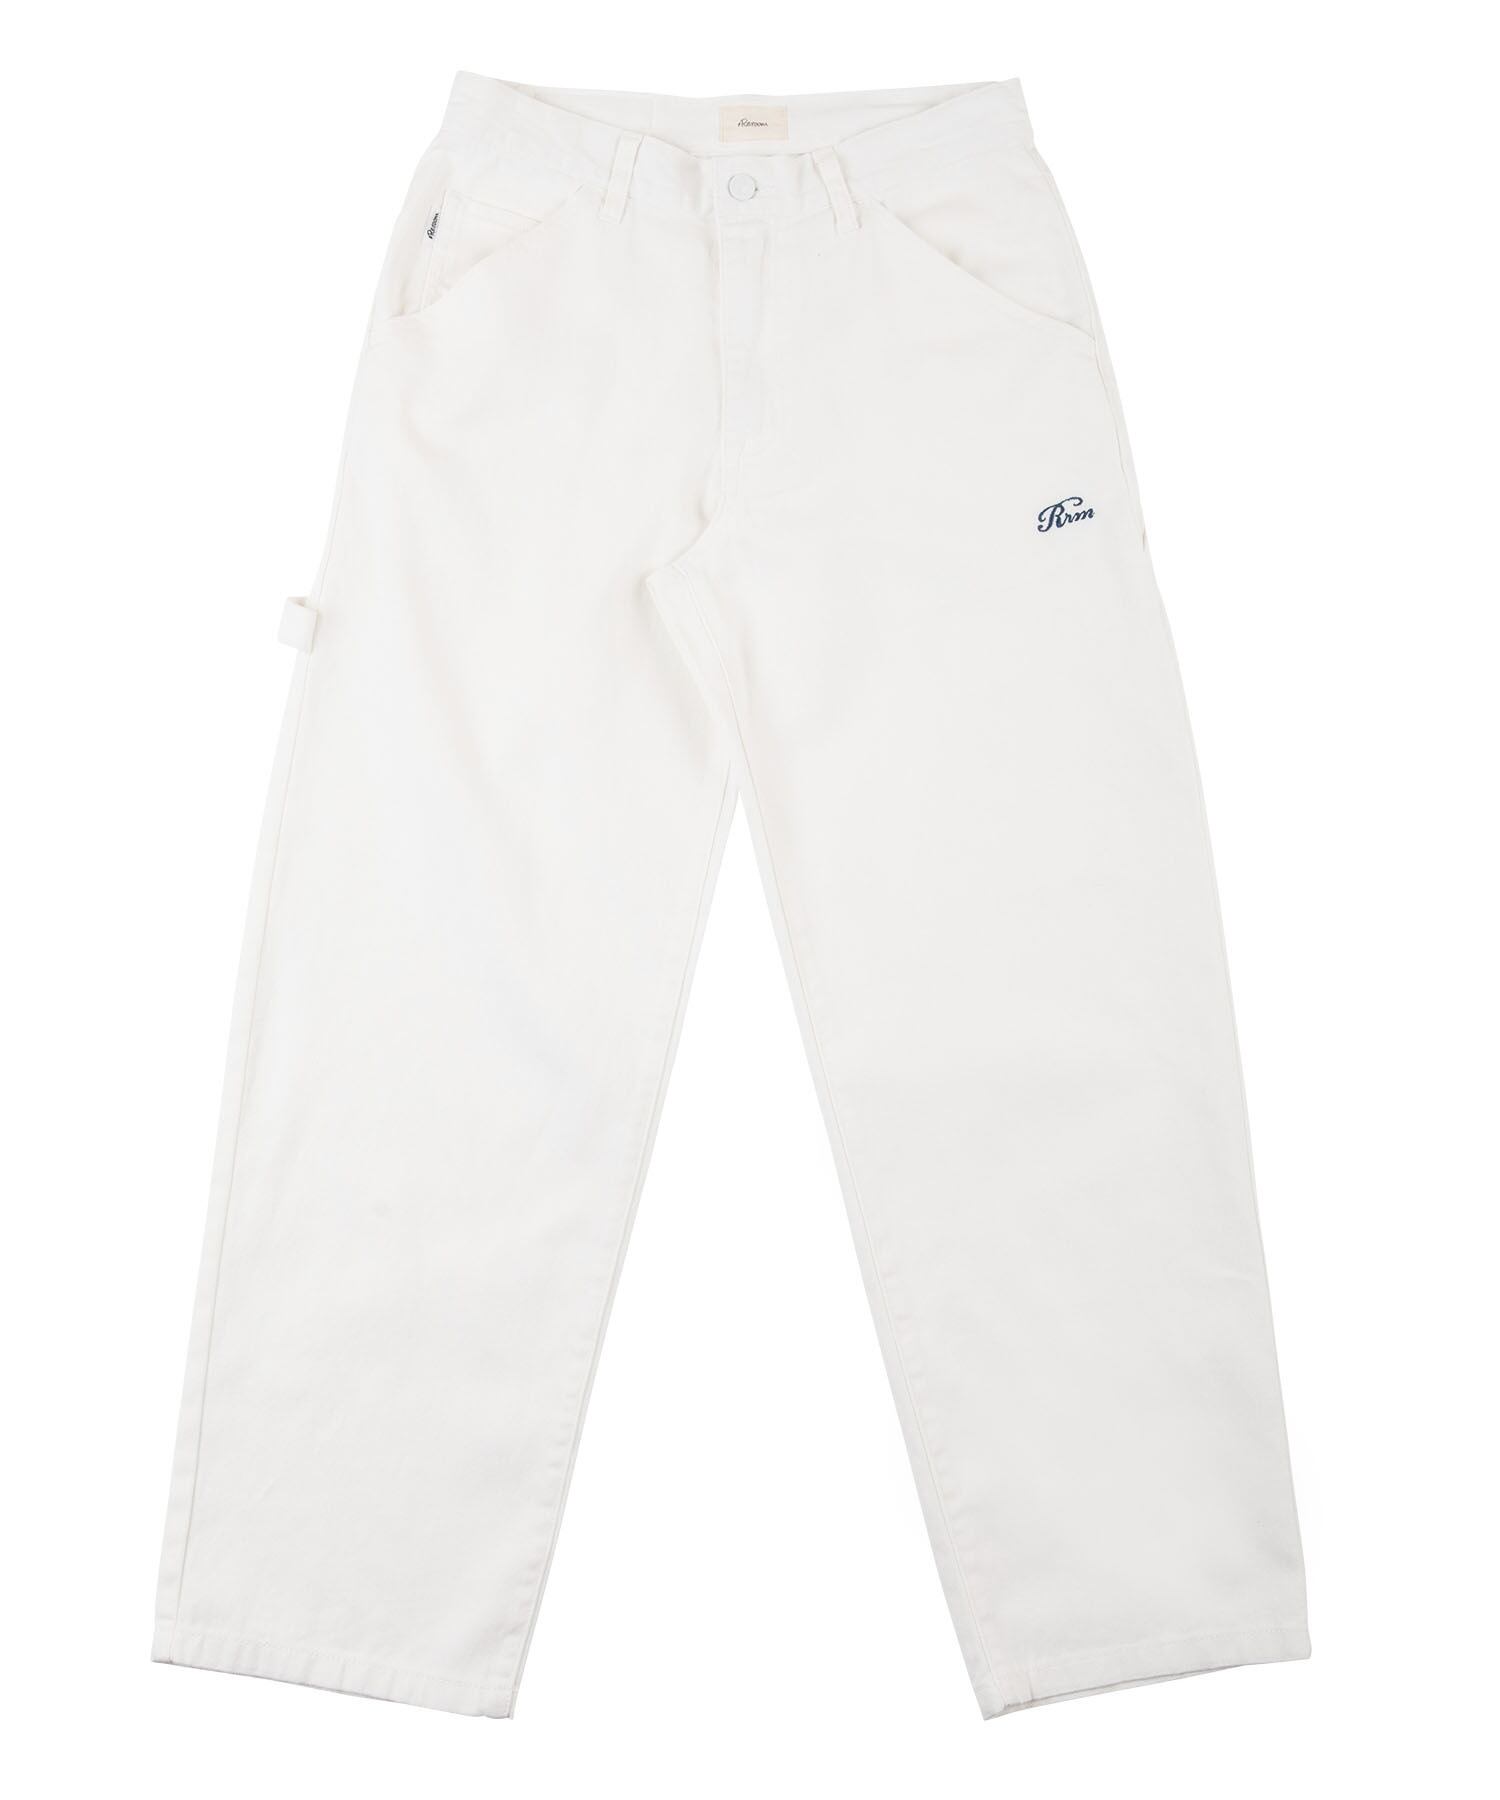 Re:room】COLOR CHINO PAINTER WIDE PANTS［REP217］ | #Re:room ...